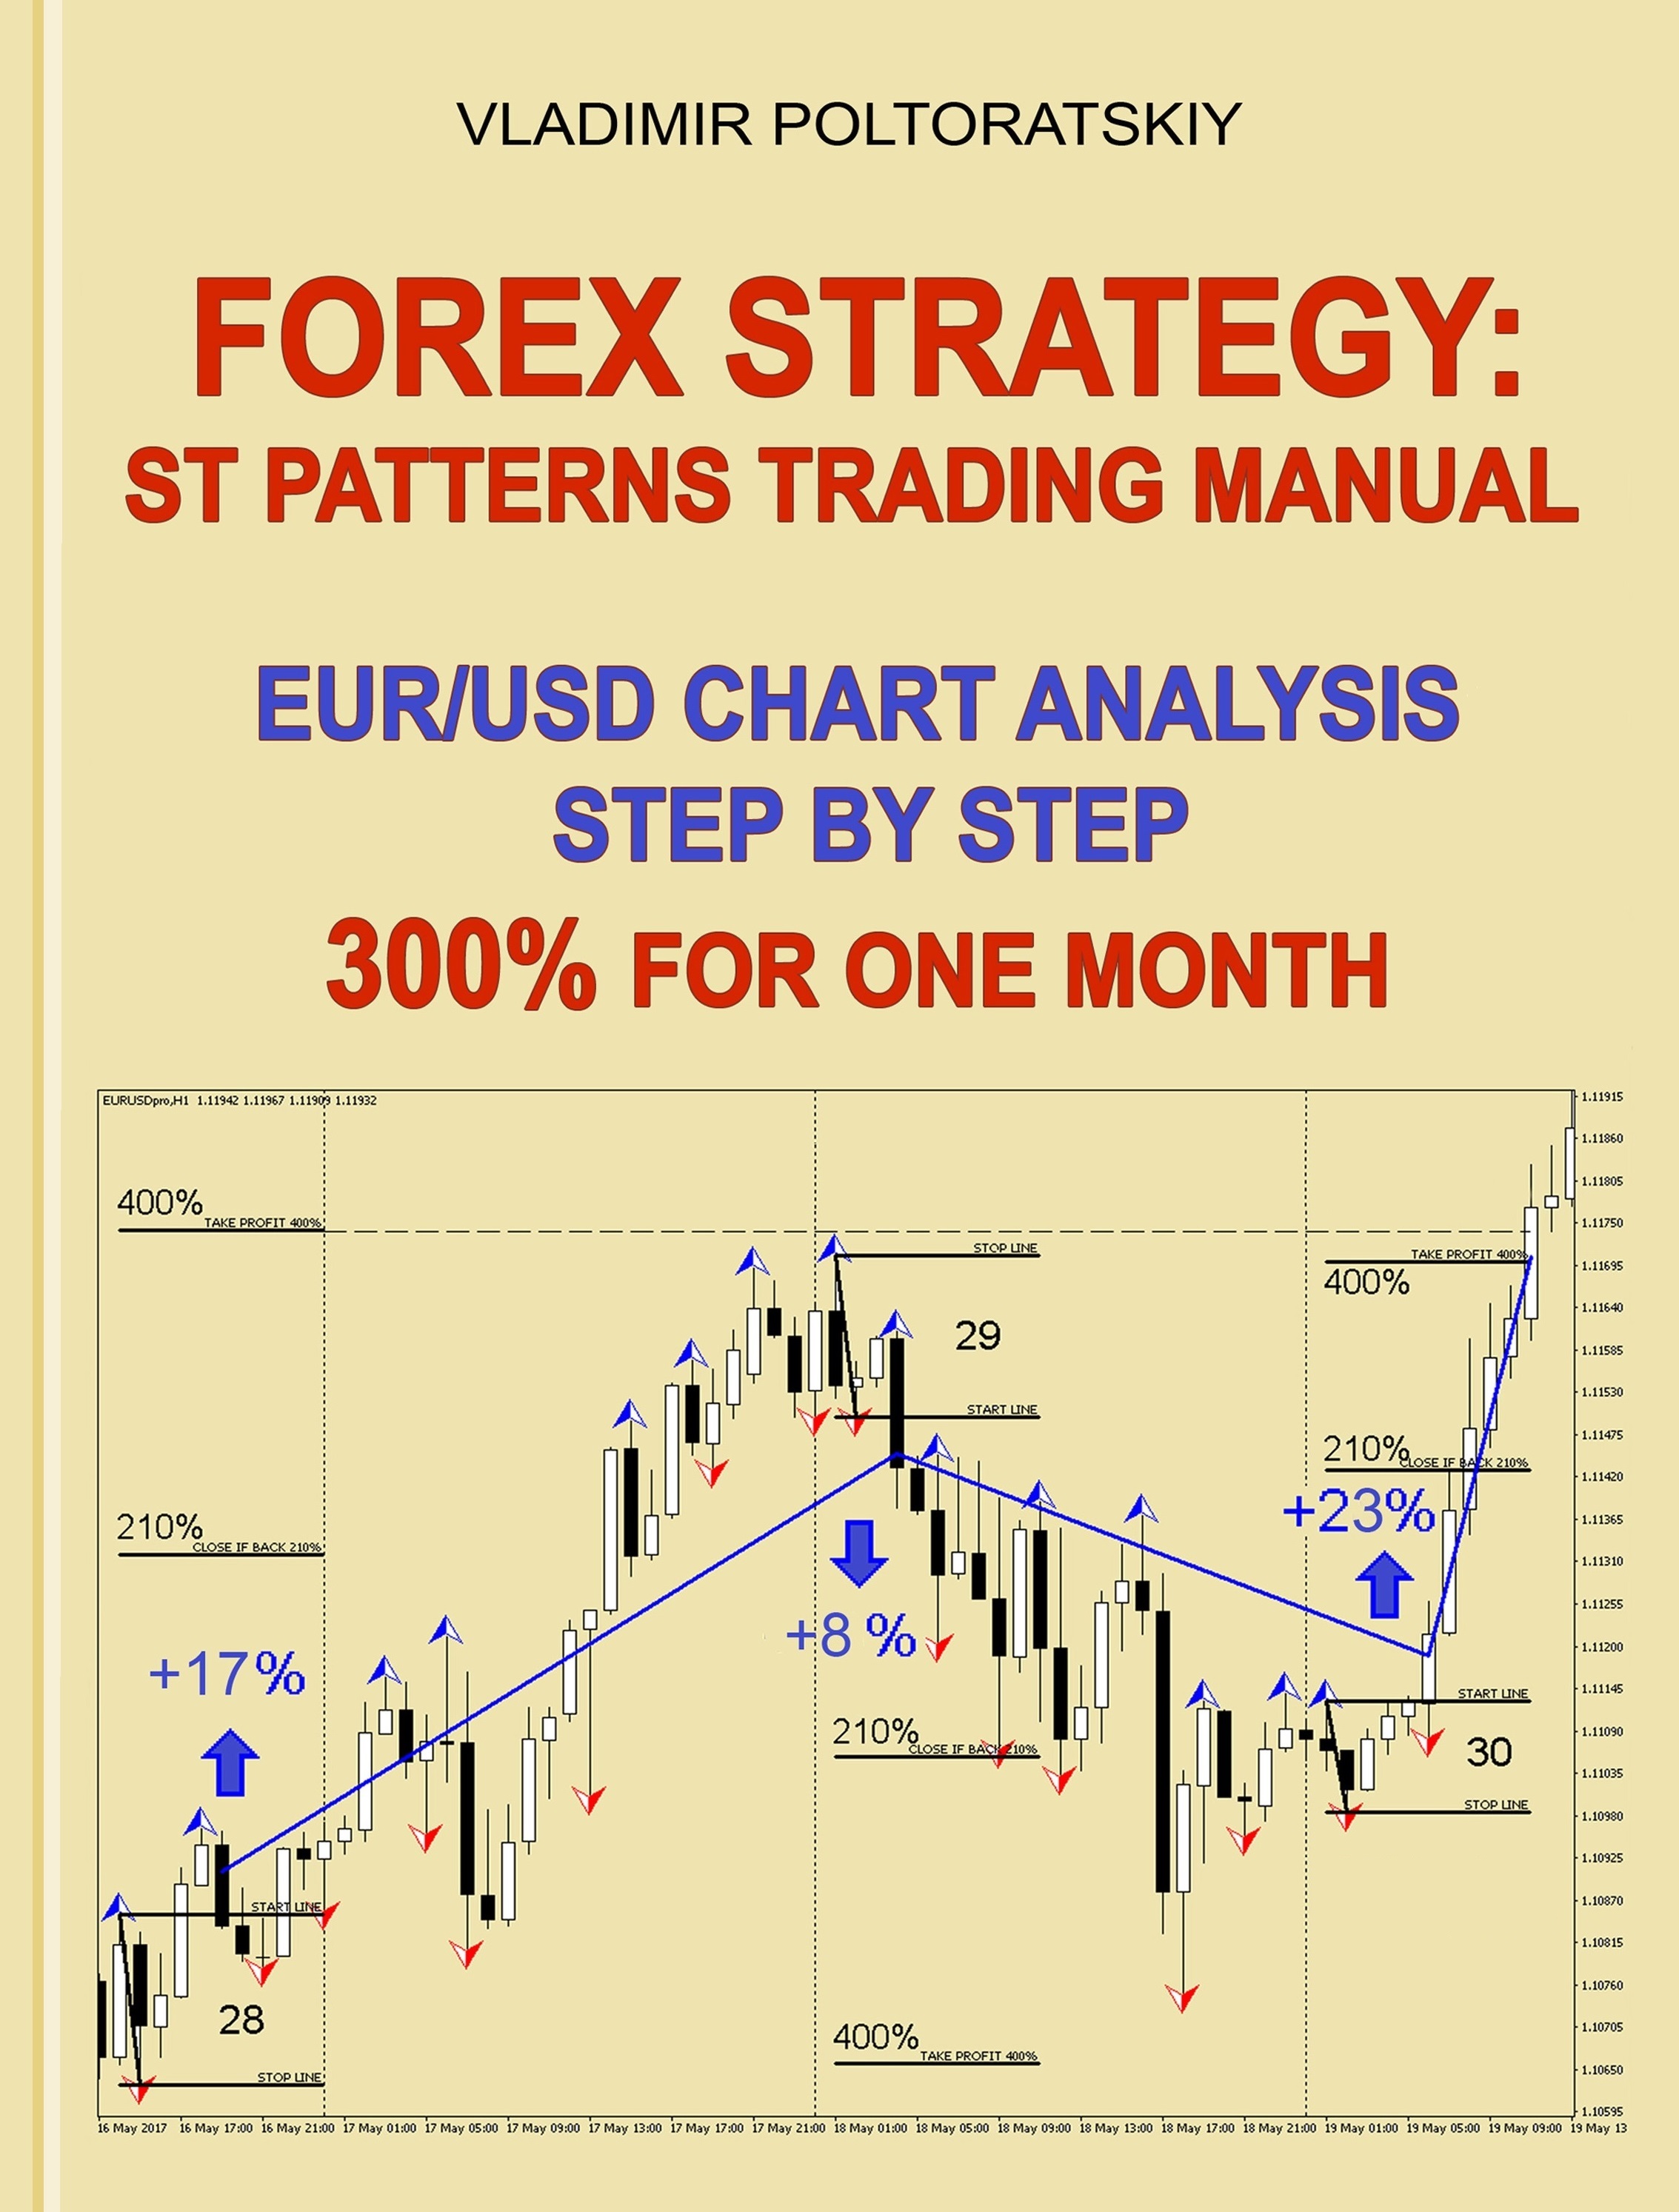 Forex Strategy St Patterns Trading Manual Chart Analysis Step By Step 300 For One Month An Ebook By !   Vladimir Poltoratskiy - 